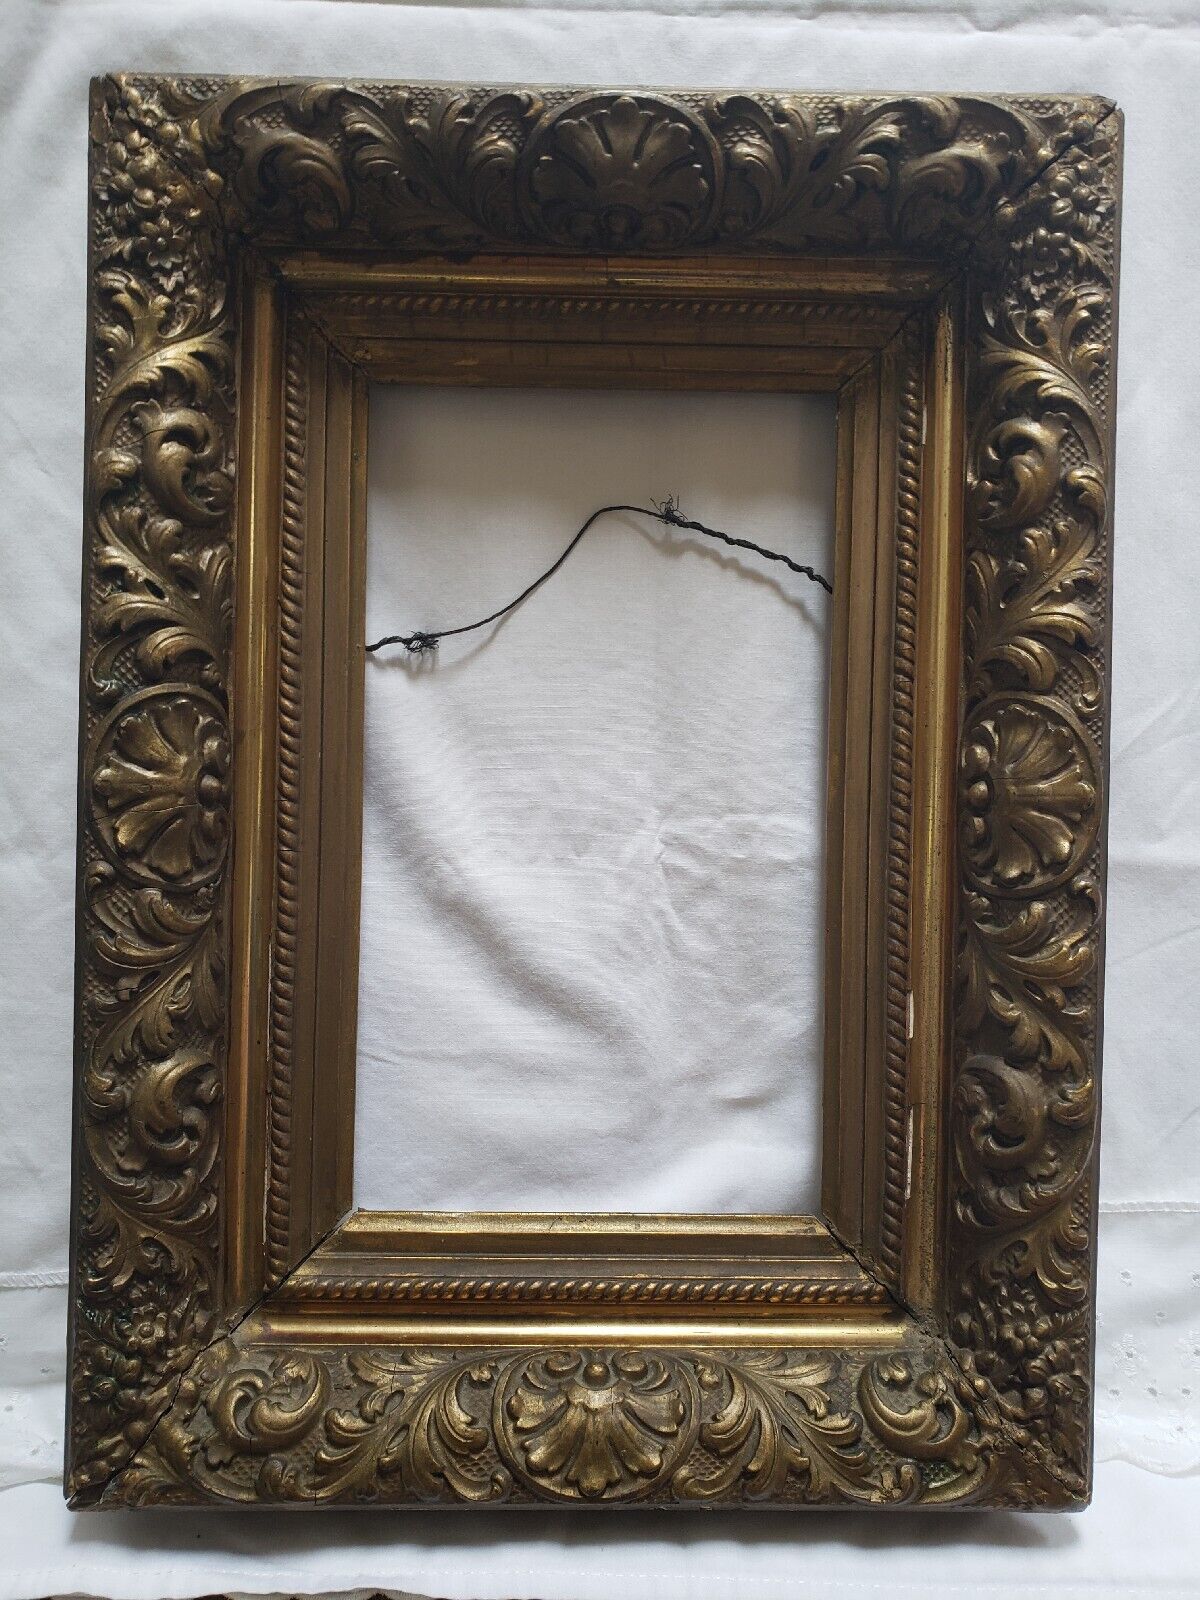 Antique (19 c.) Frame in Original Finish Gilt Viewing Size 6.5X11.5 inches